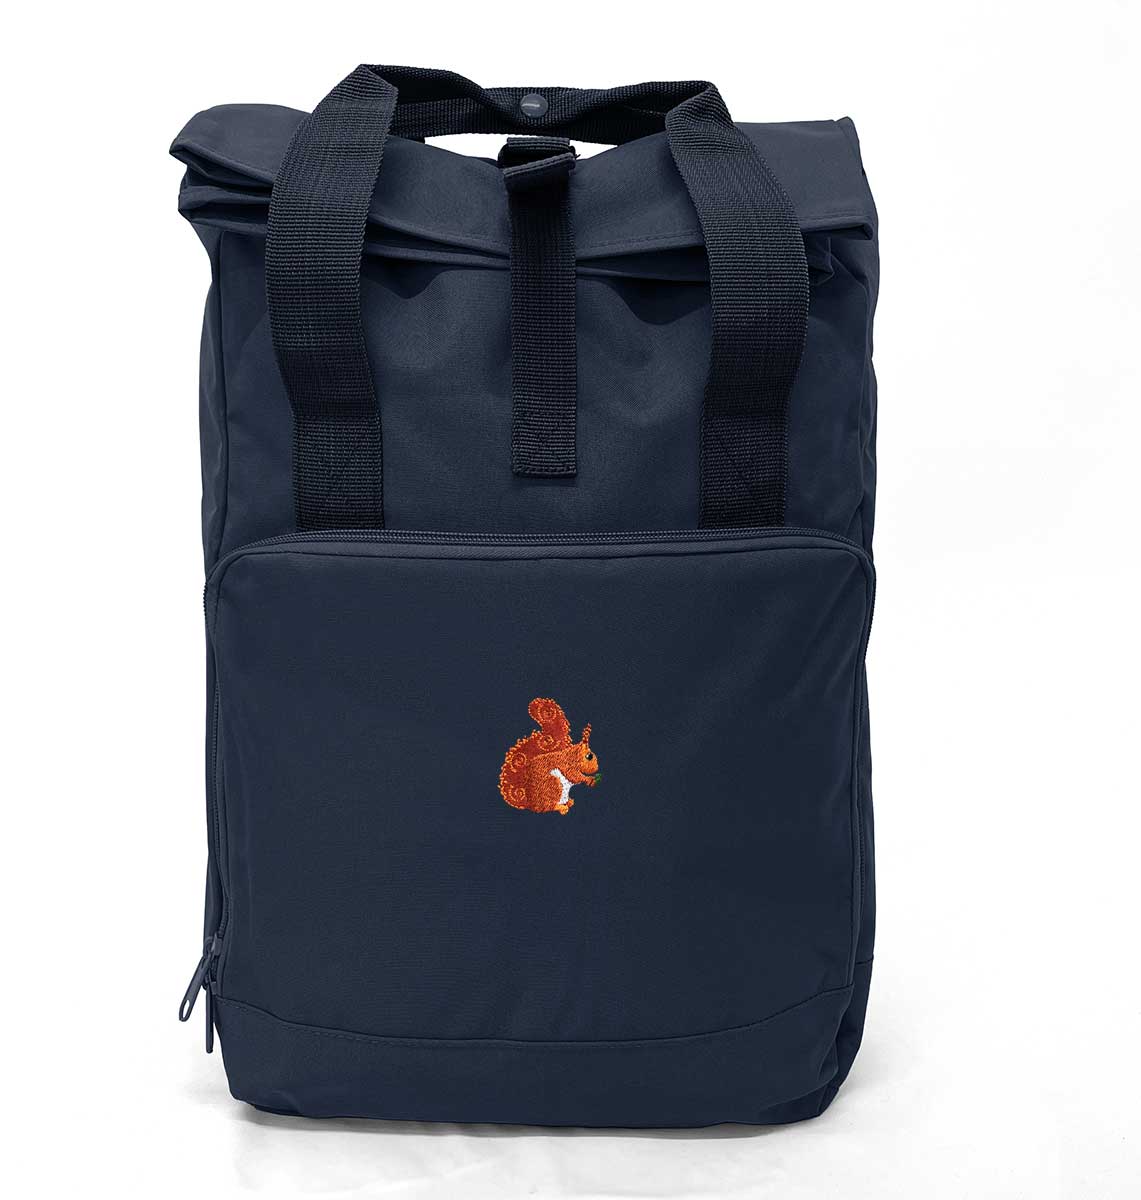 Red Squirrel Large Roll-top Laptop Recycled Backpack - Blue Panda